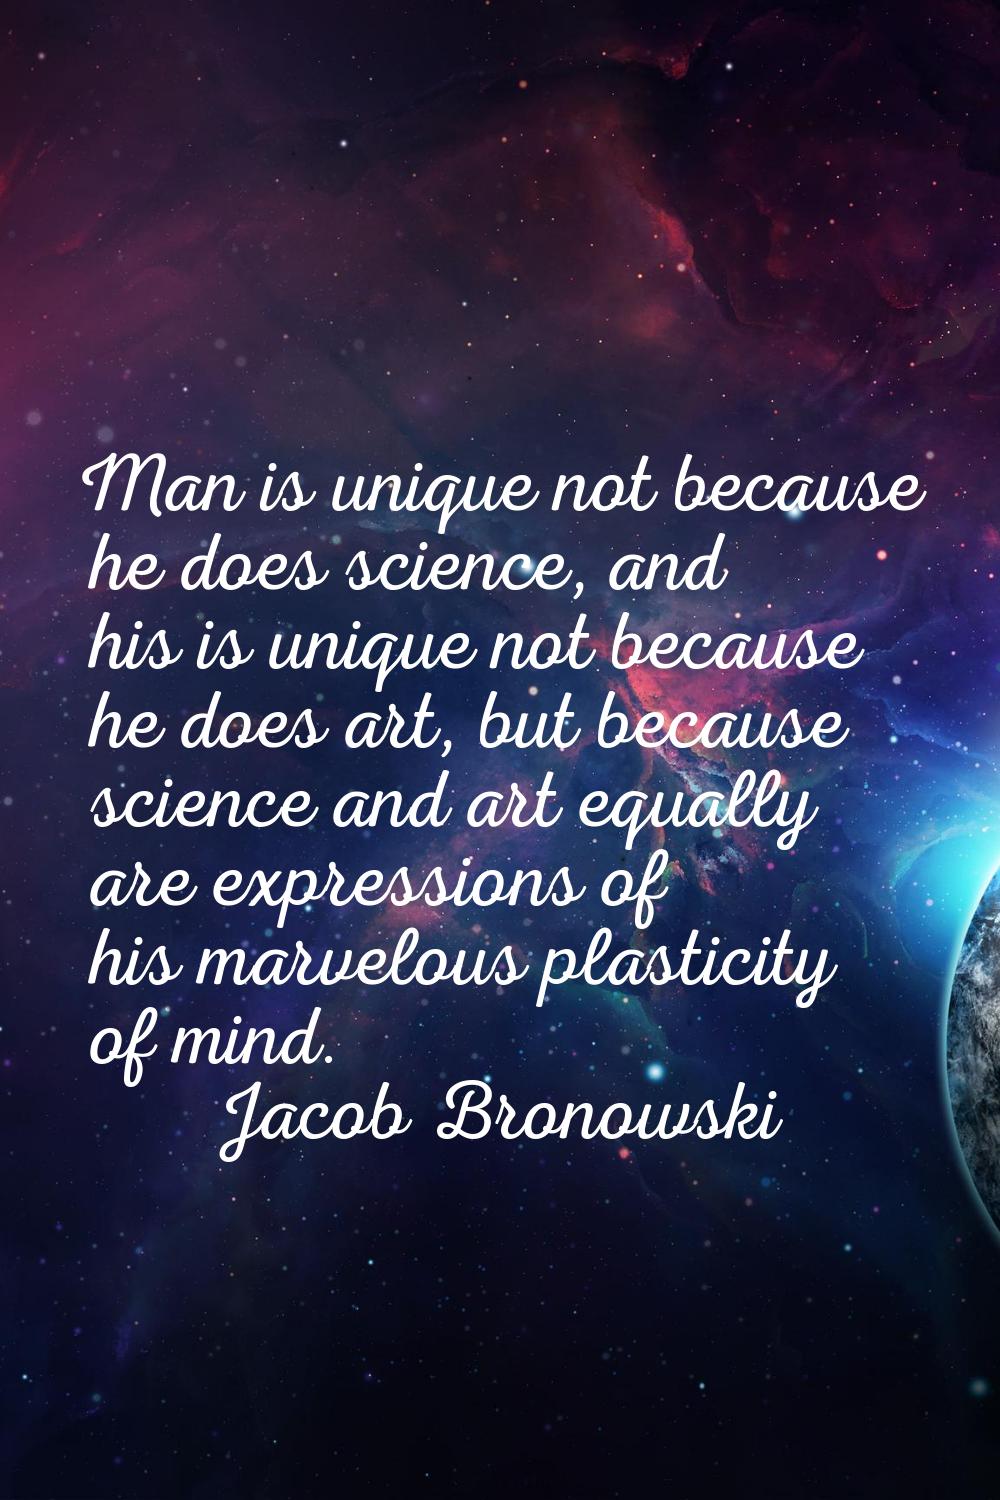 Man is unique not because he does science, and his is unique not because he does art, but because s